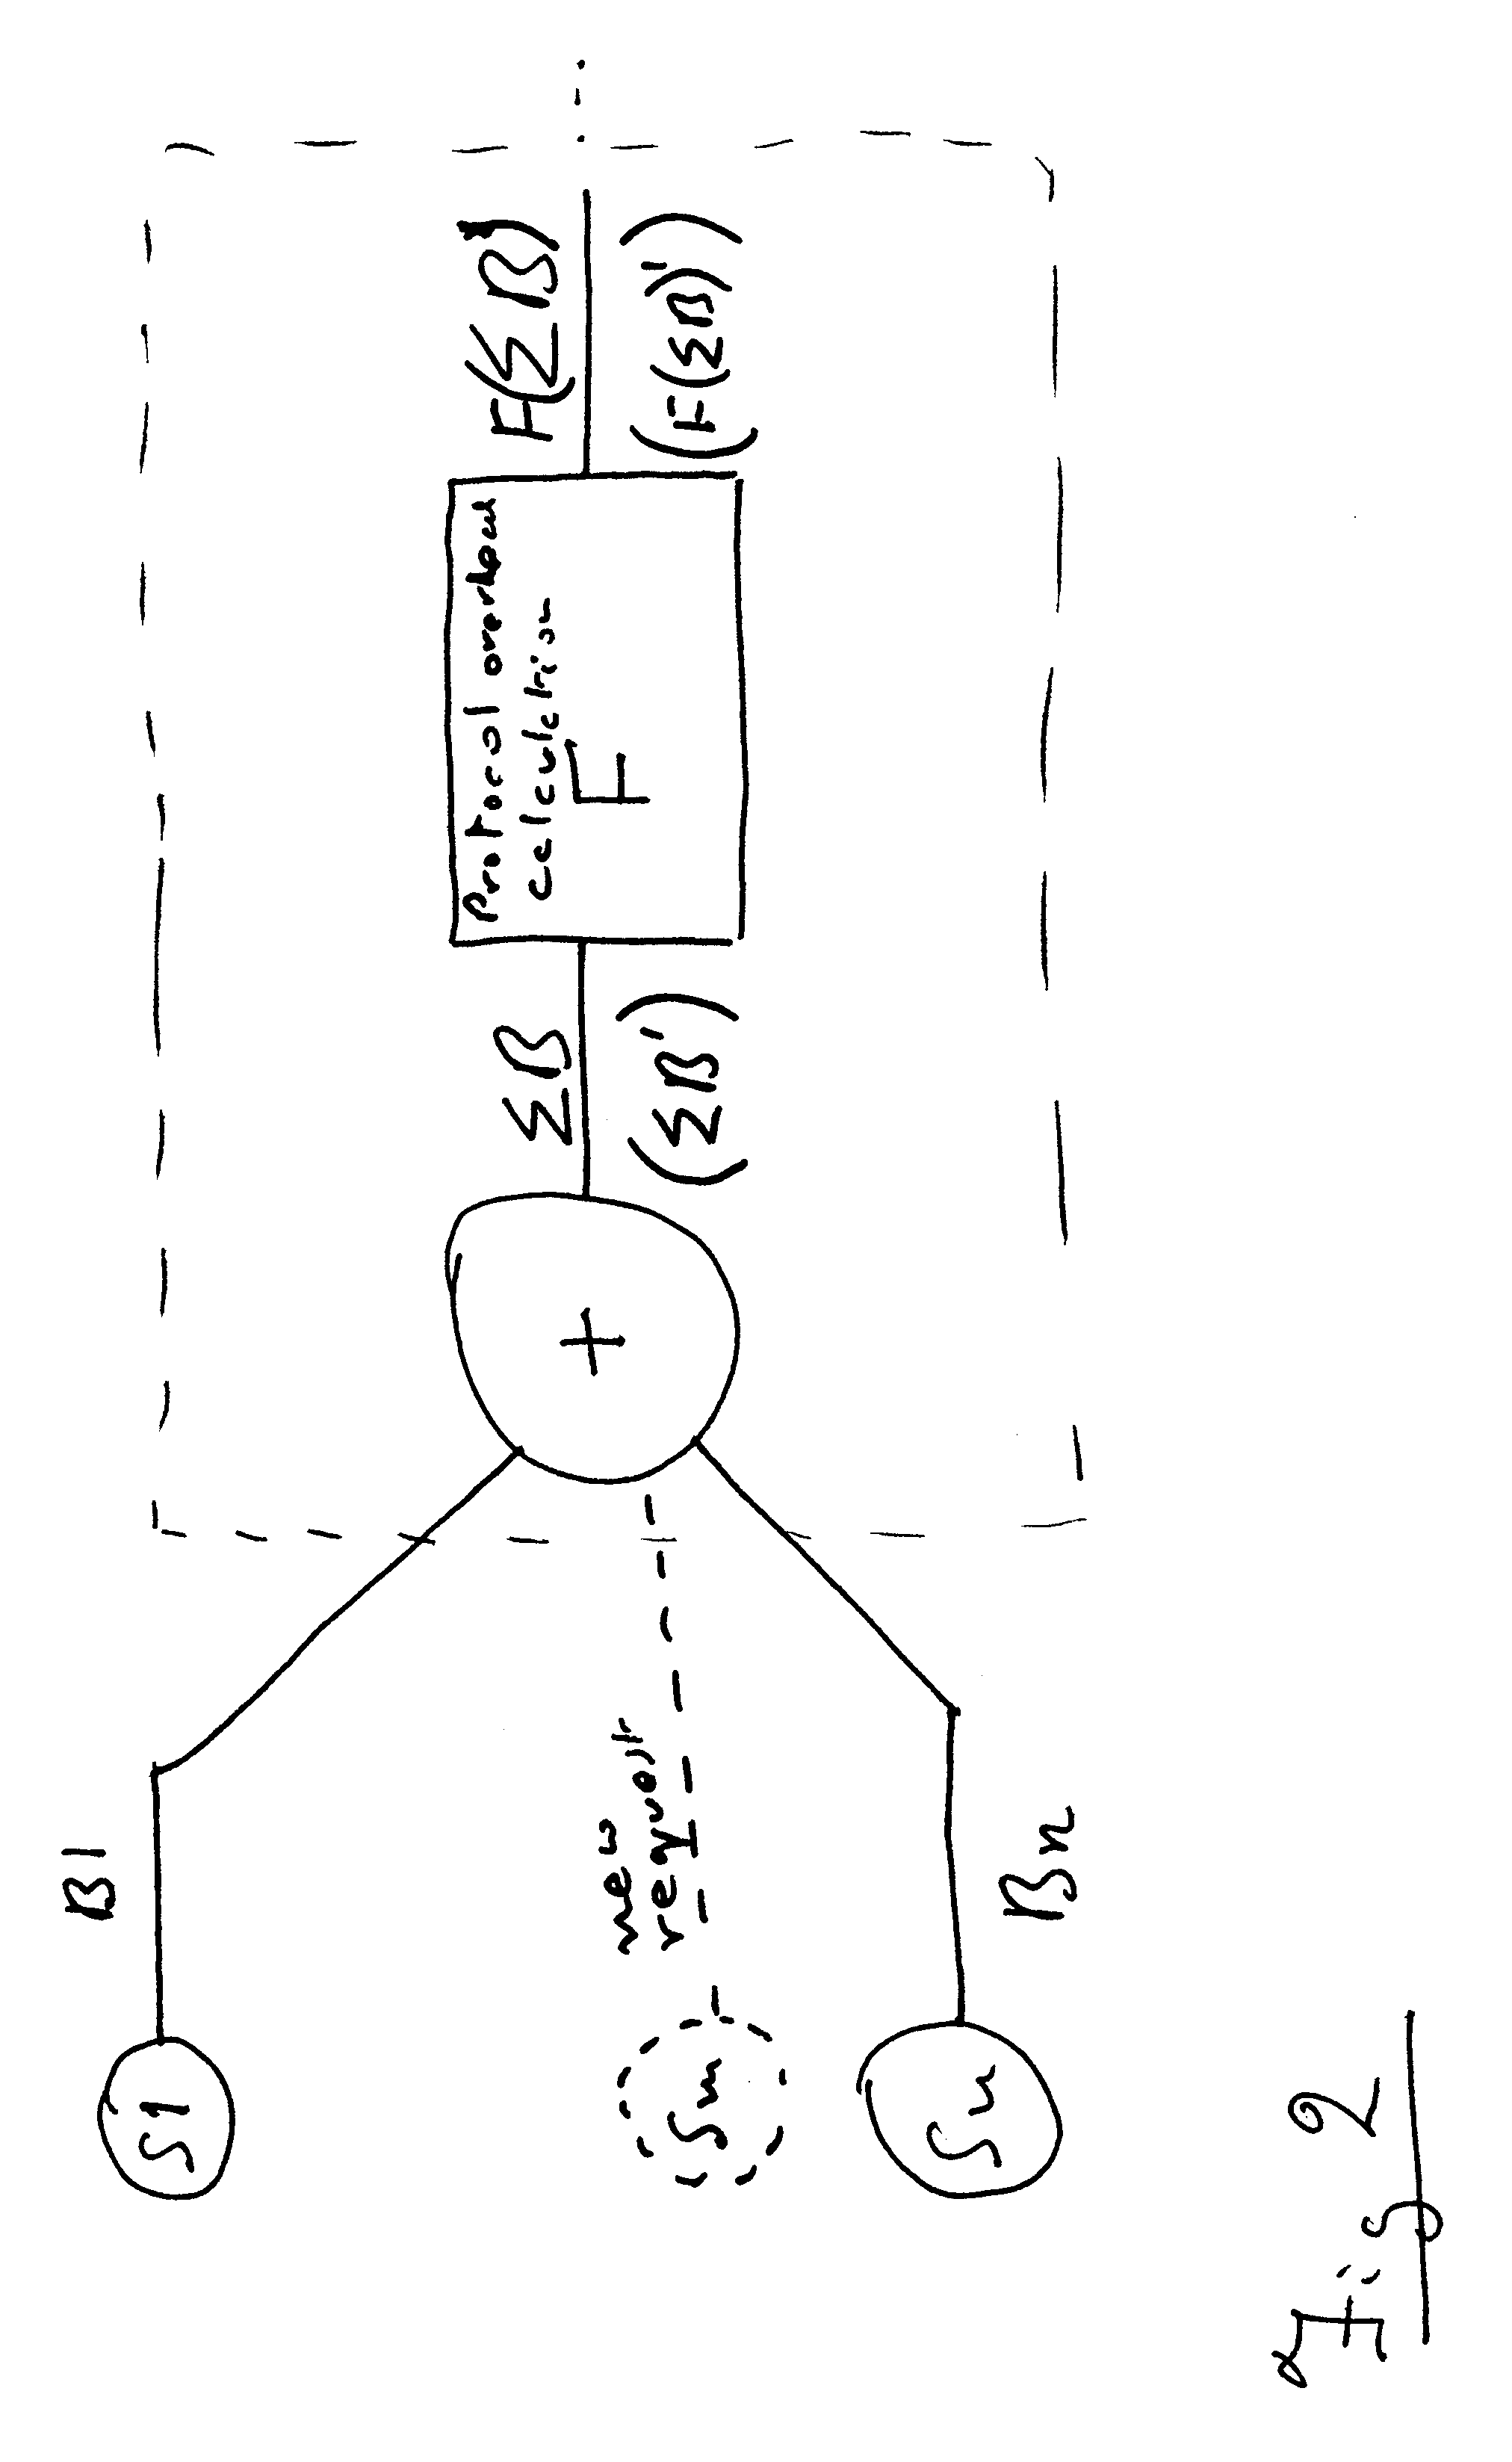 Providing connection admission control in a communications network